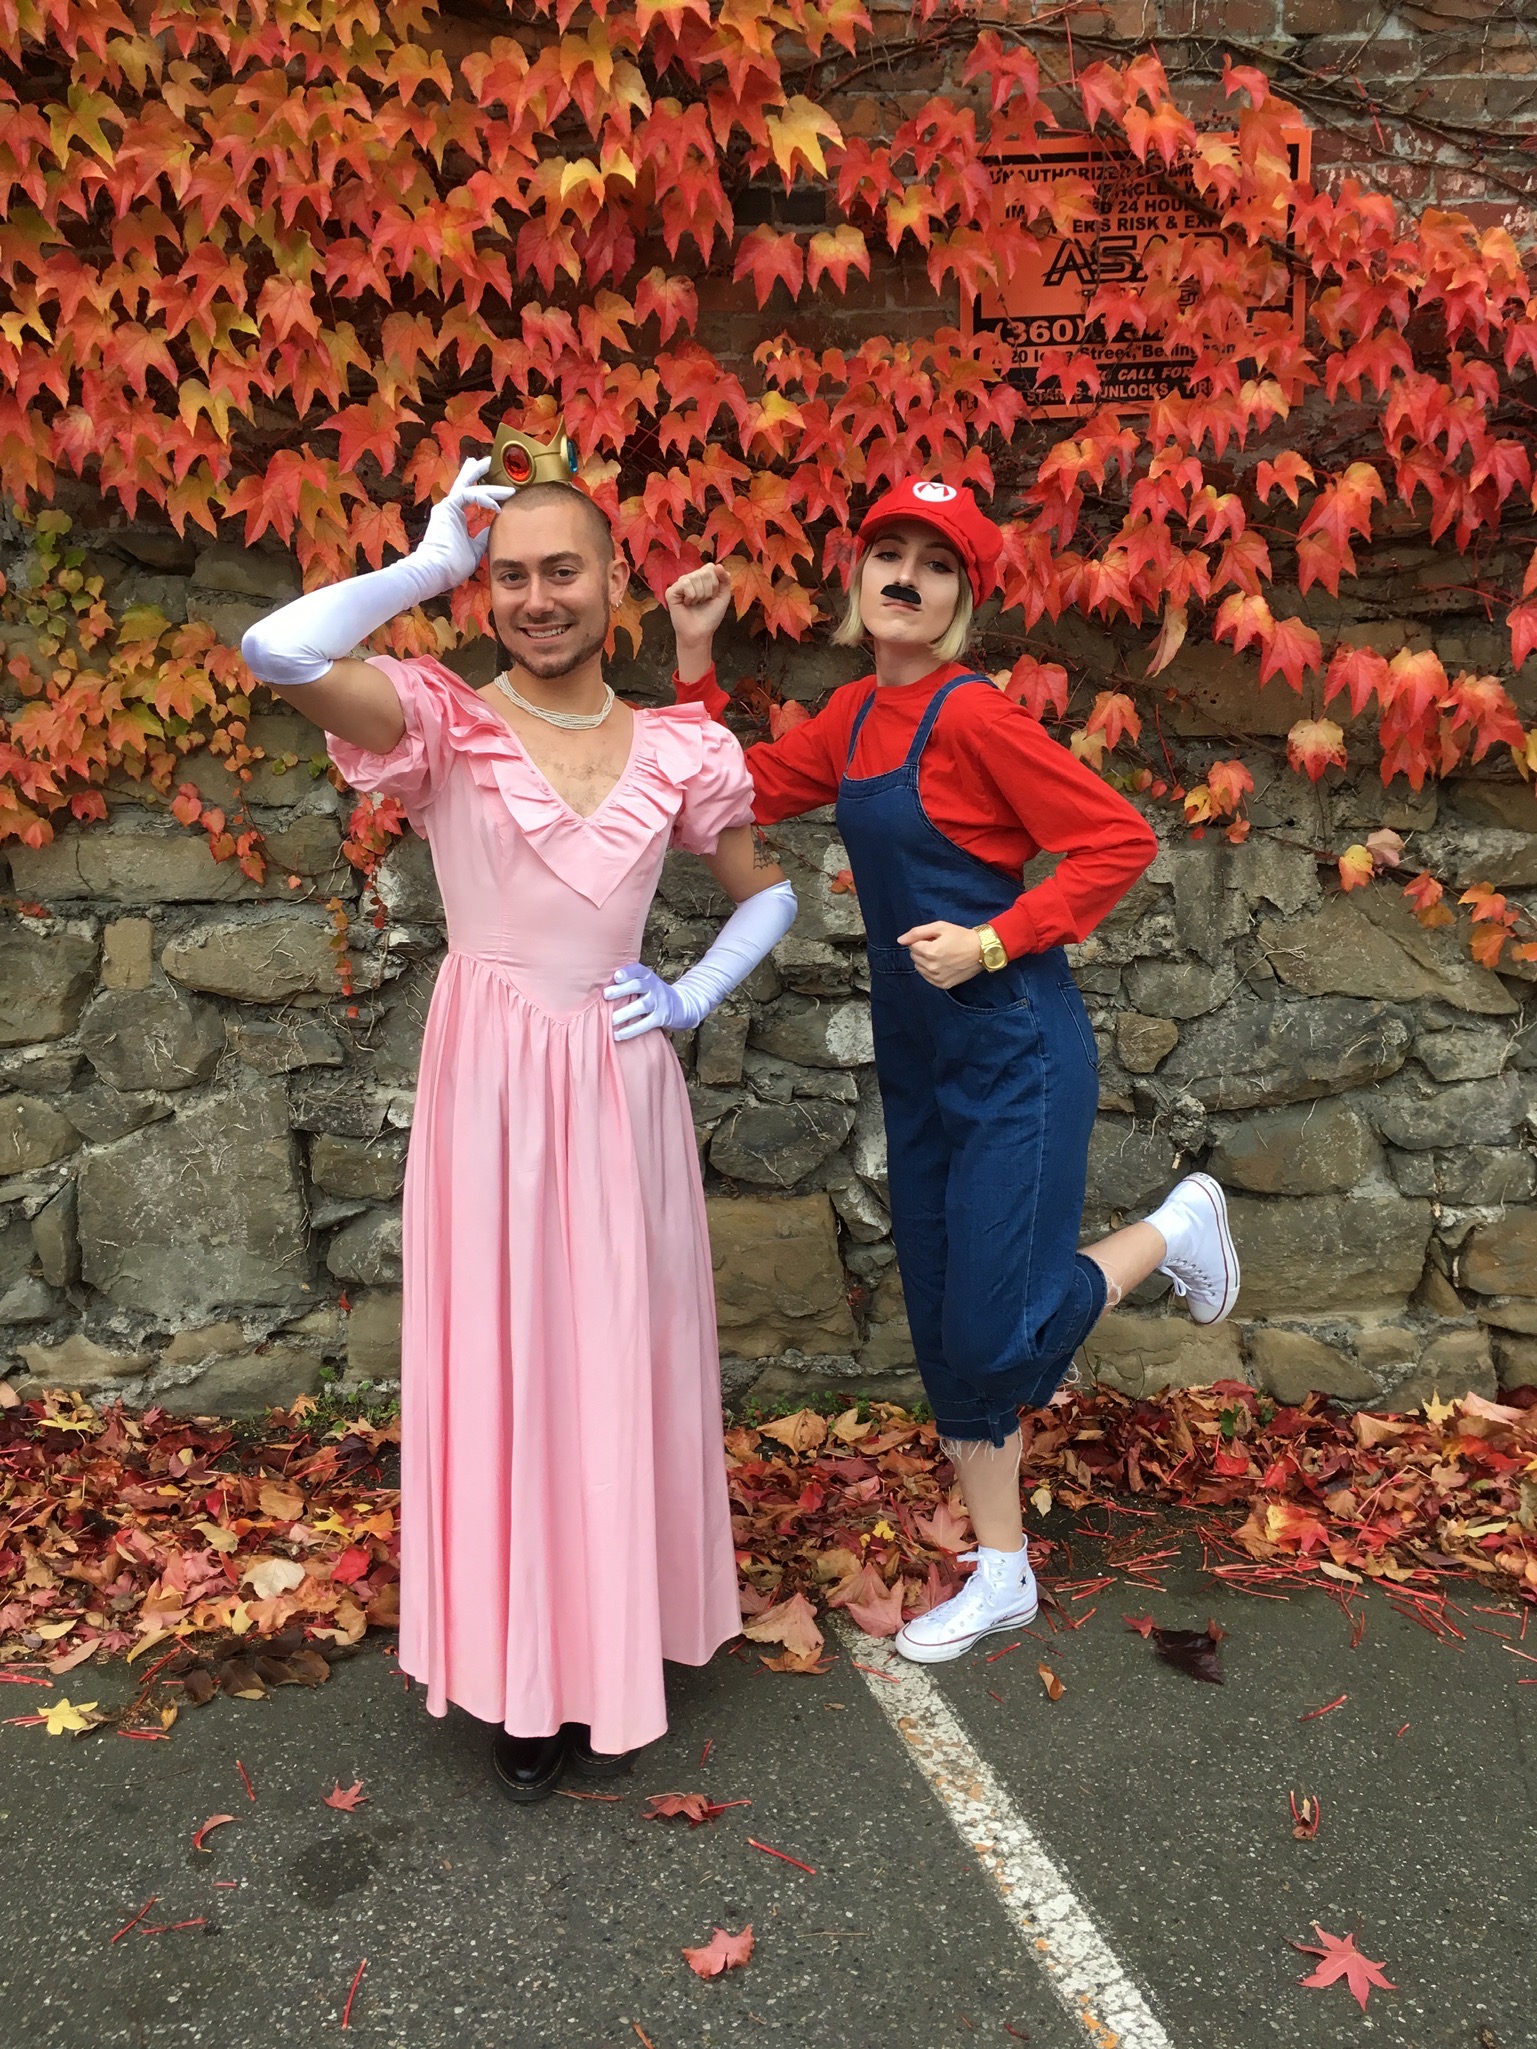 Princess Peach and Mario costumes, costumes for Halloween 2020